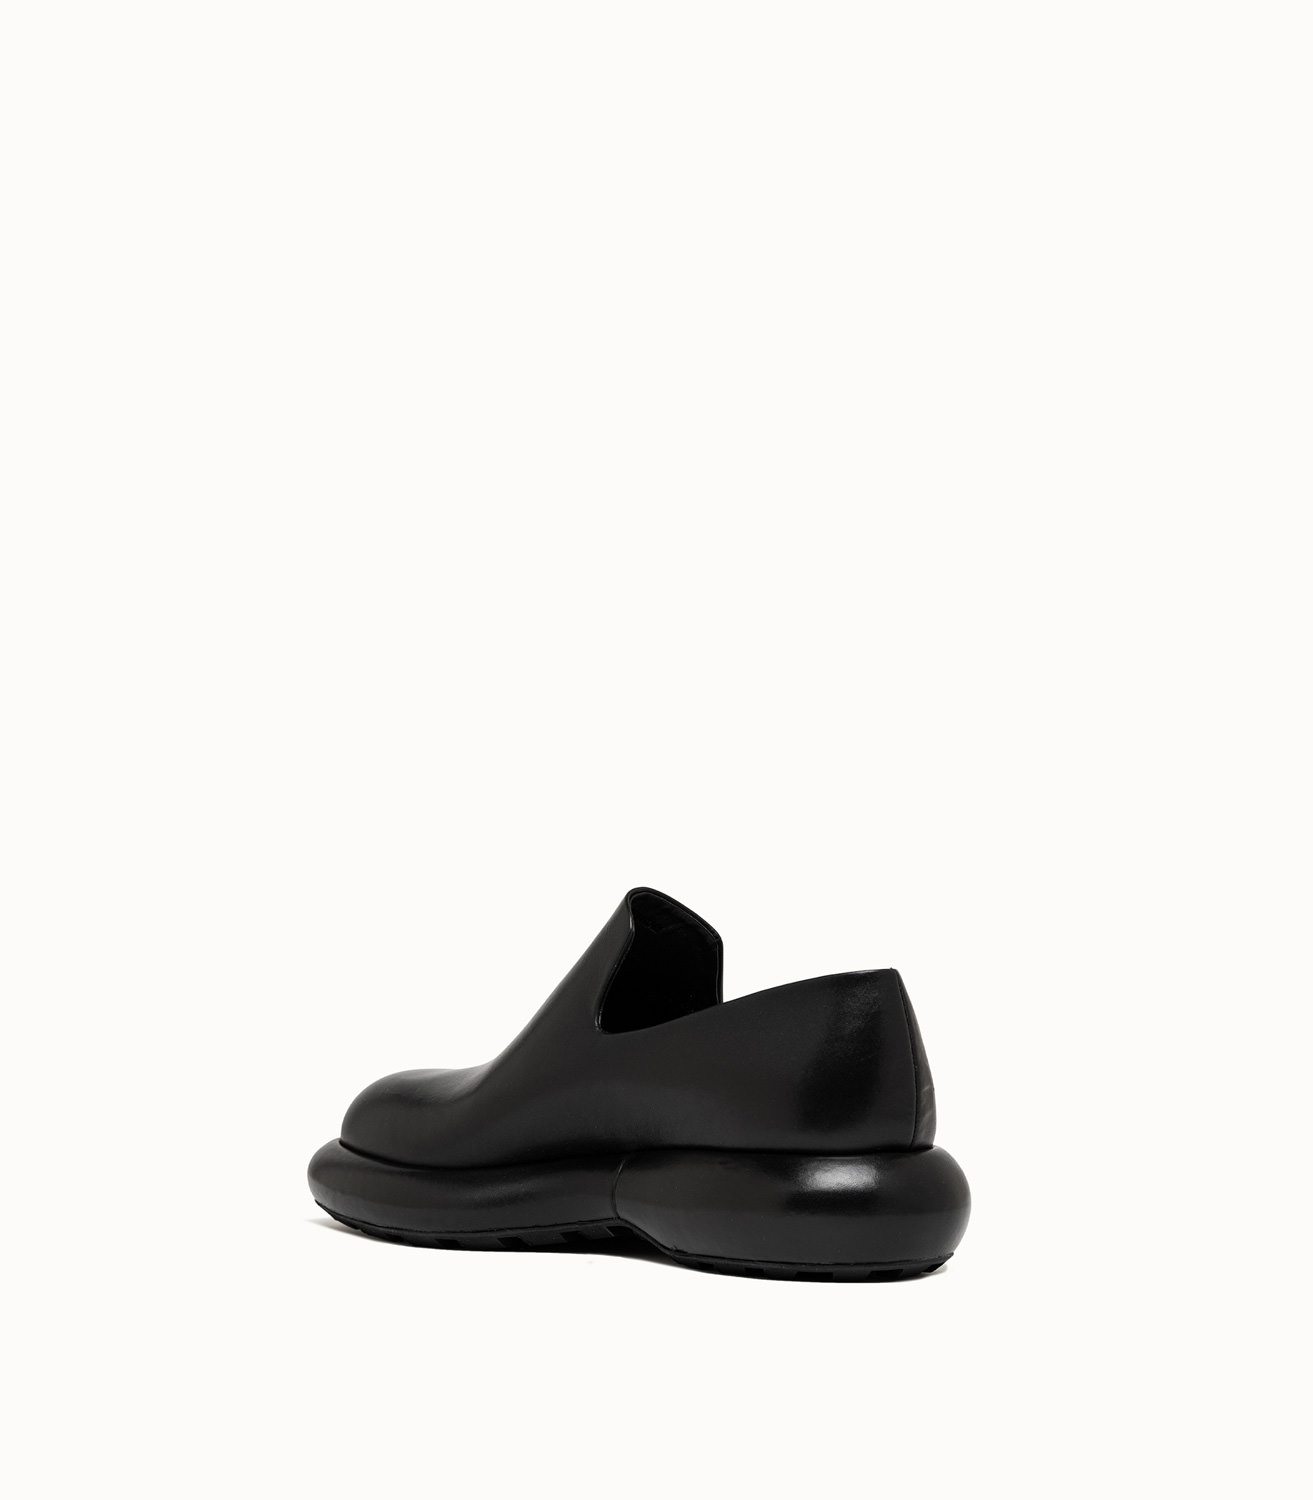 JIL SANDER BOX LEATHER LOW SHOES   Playground